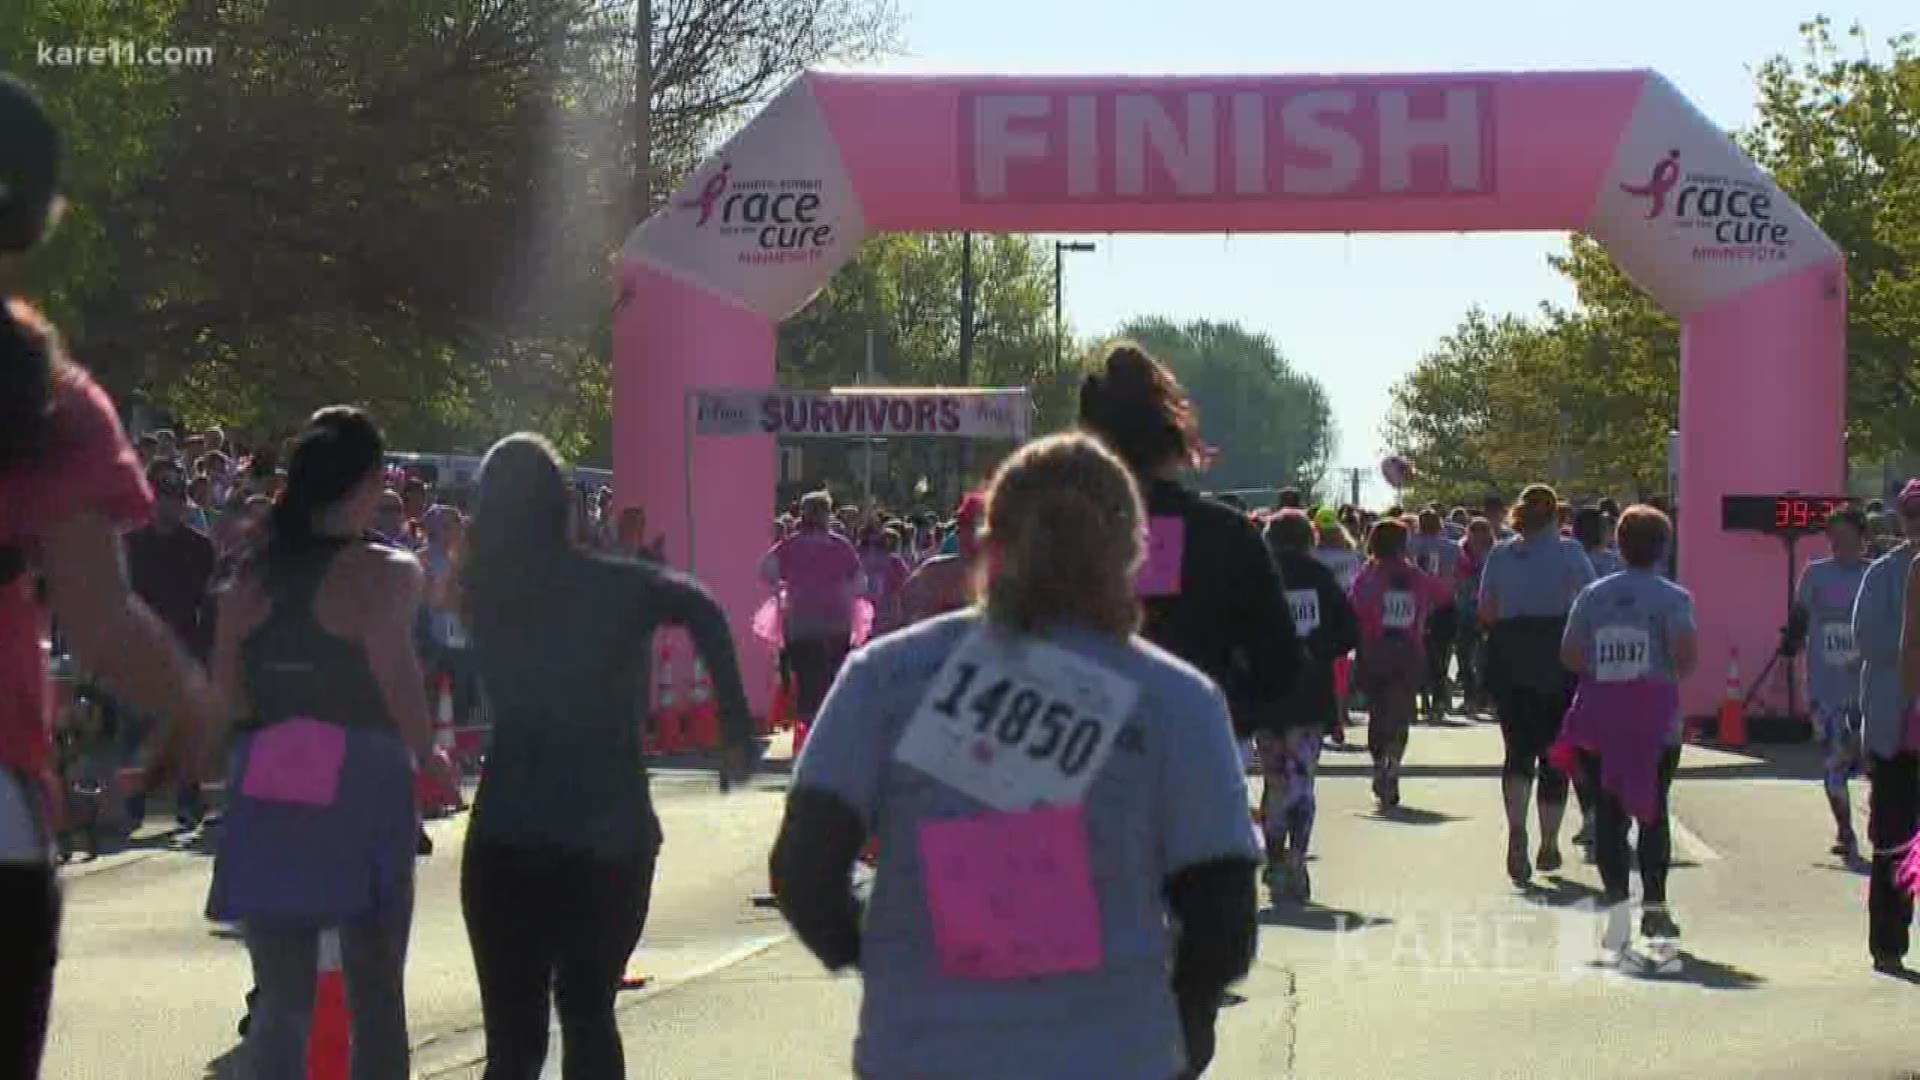 Thousands walk and run for Race for the Cure